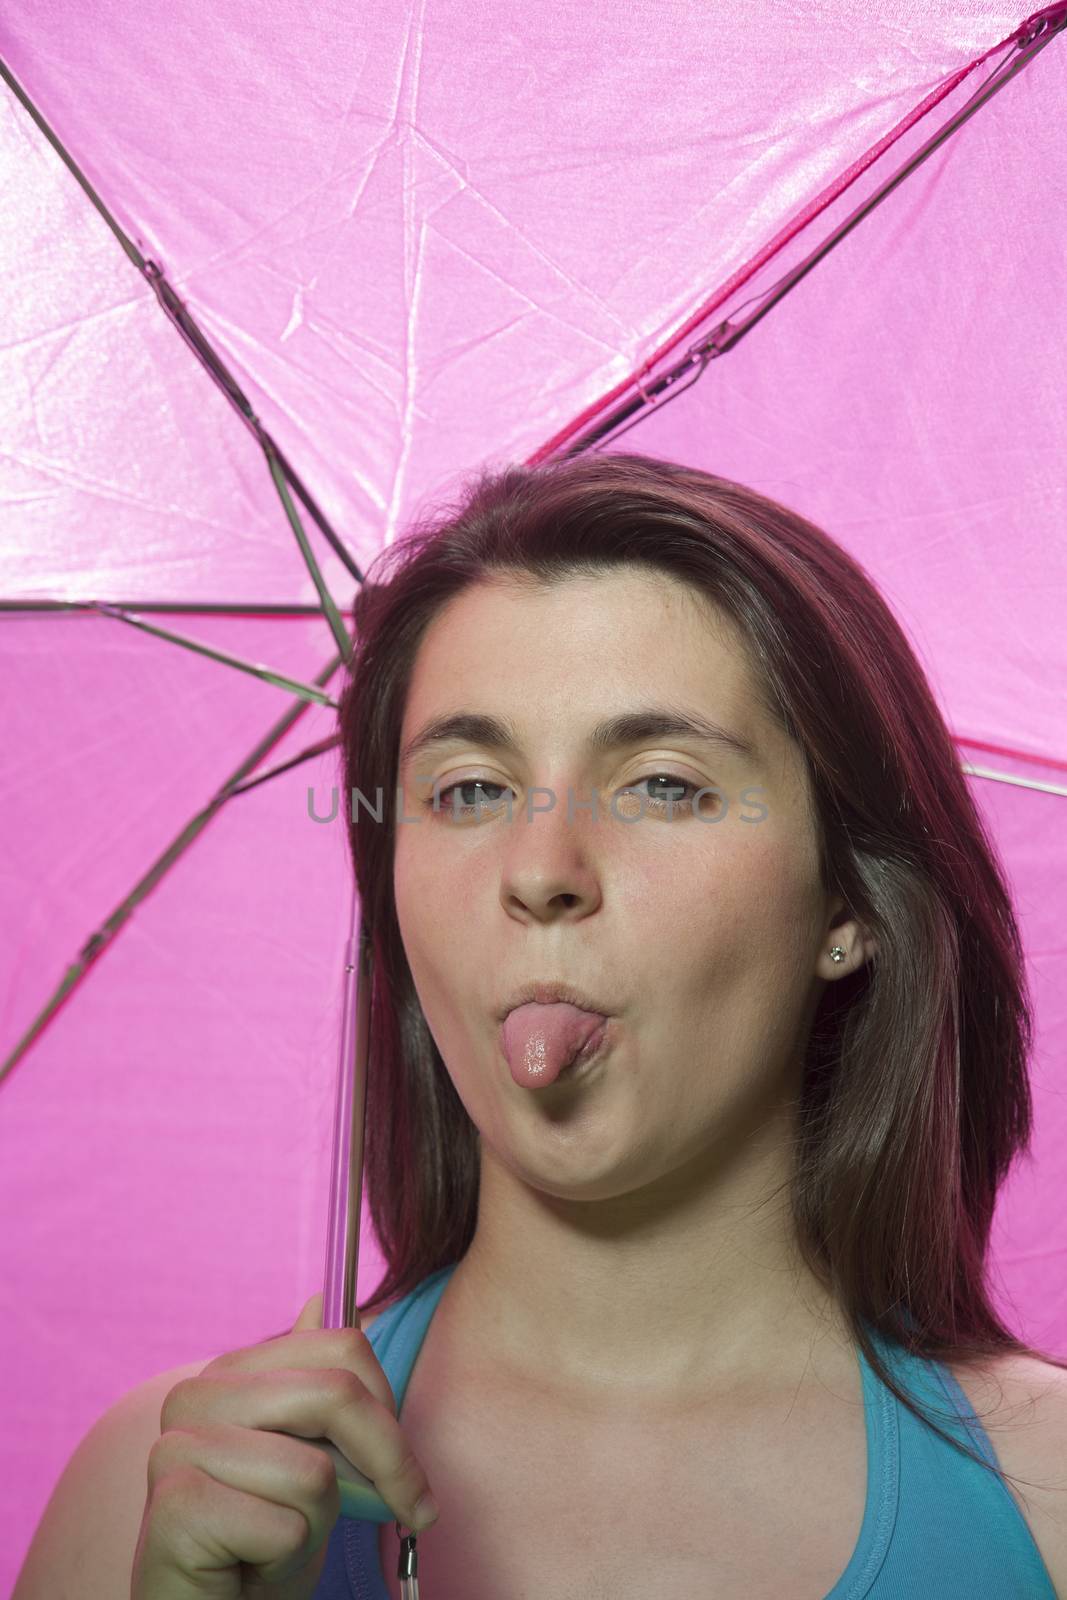 pretty young woman with blue shirt teasing sticking out tongue and pink umbrella background